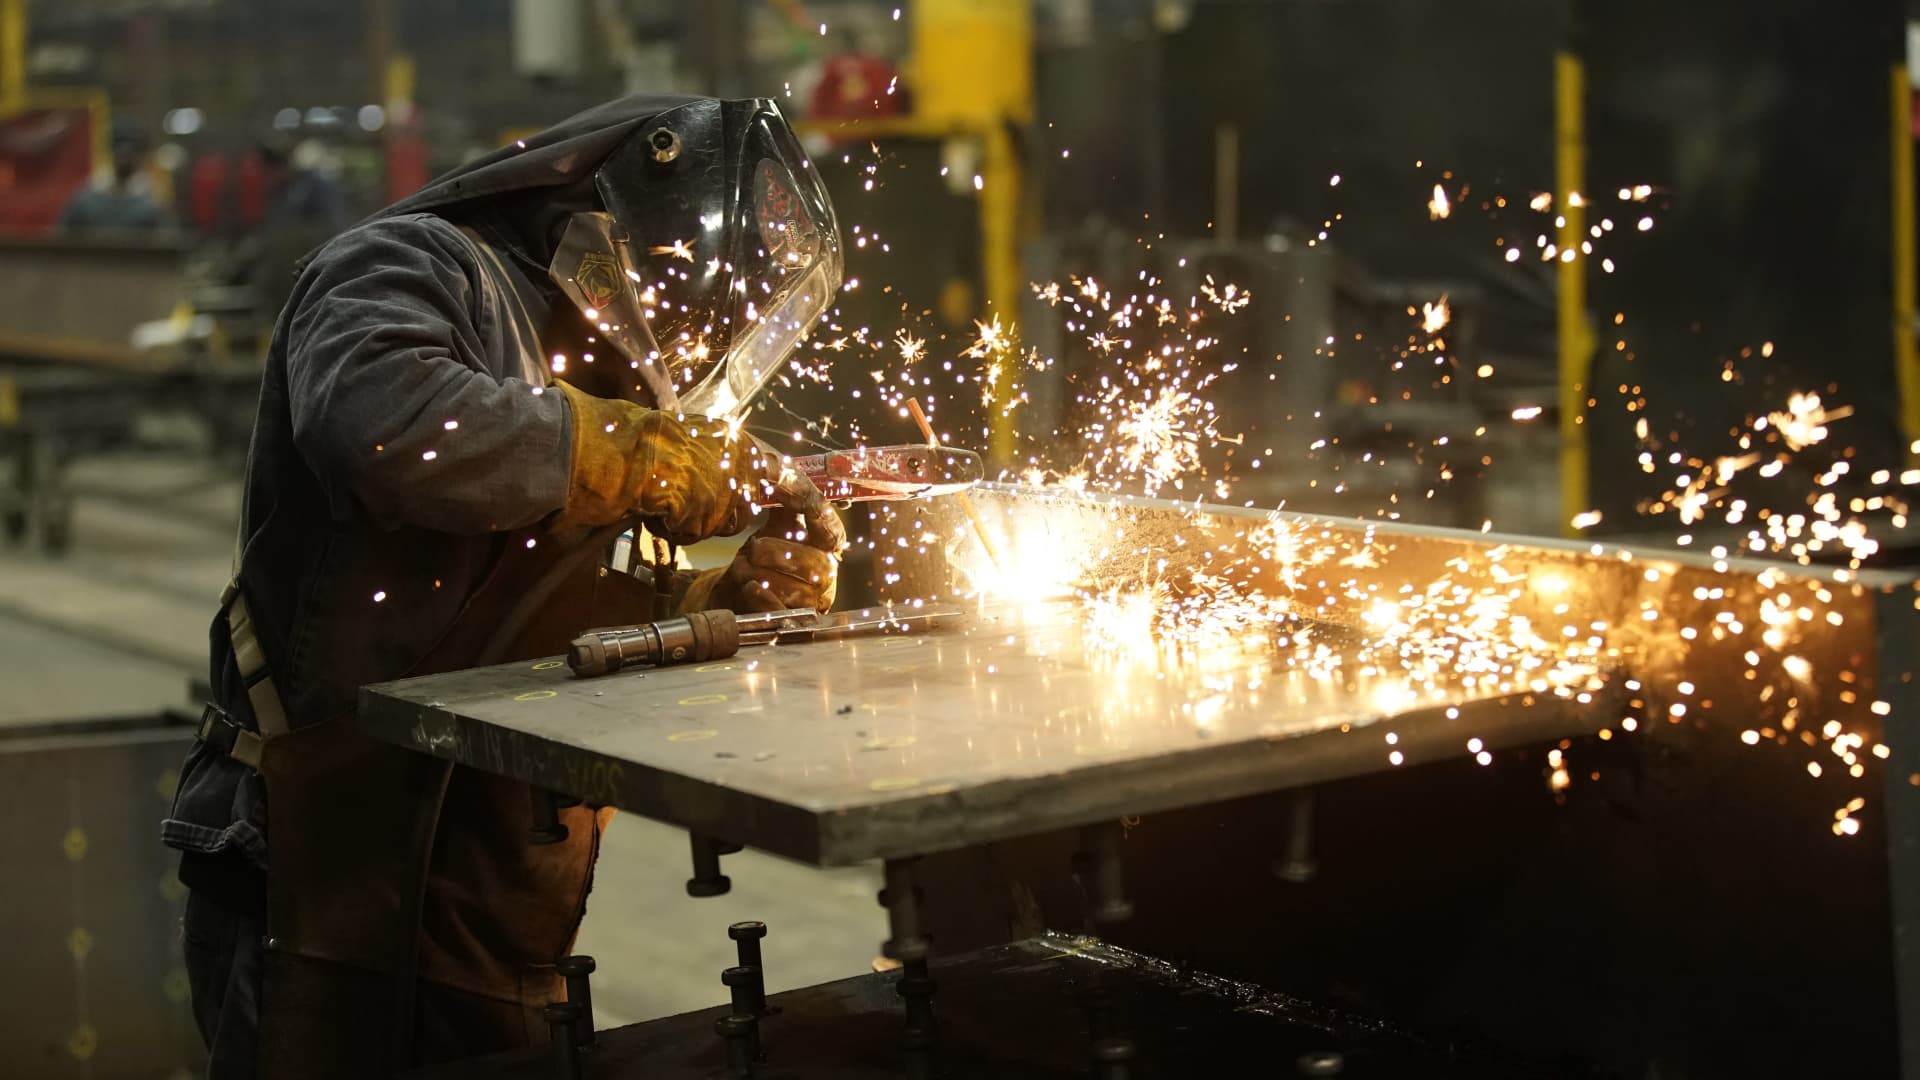 A worker welds a structural steel beam during production at the SME Steel Contractors facility in West Jordan, Utah, on Feb. 1, 2021.